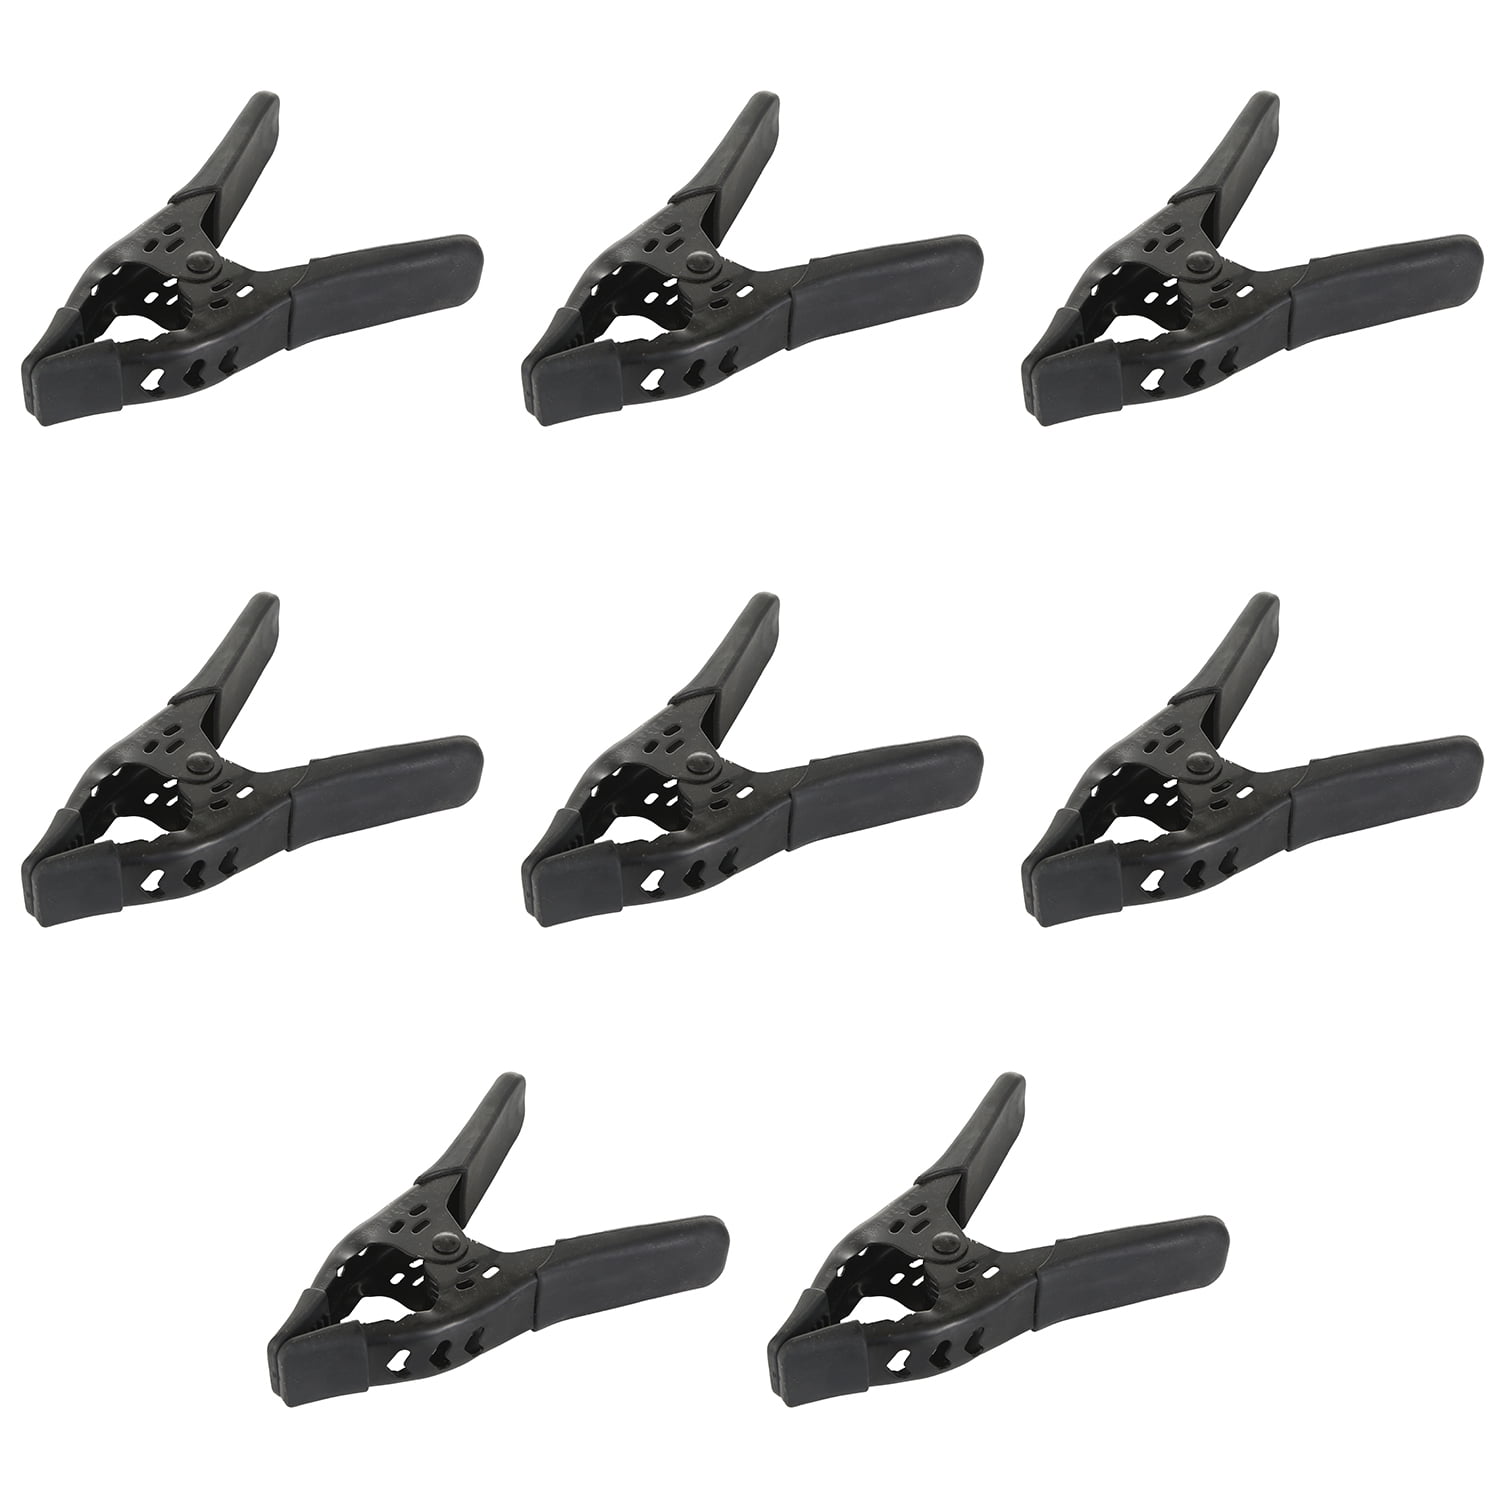 6 inch Clamp Large Heavy Duty Spring Metal 3 inch Jaw opening 12 Pack